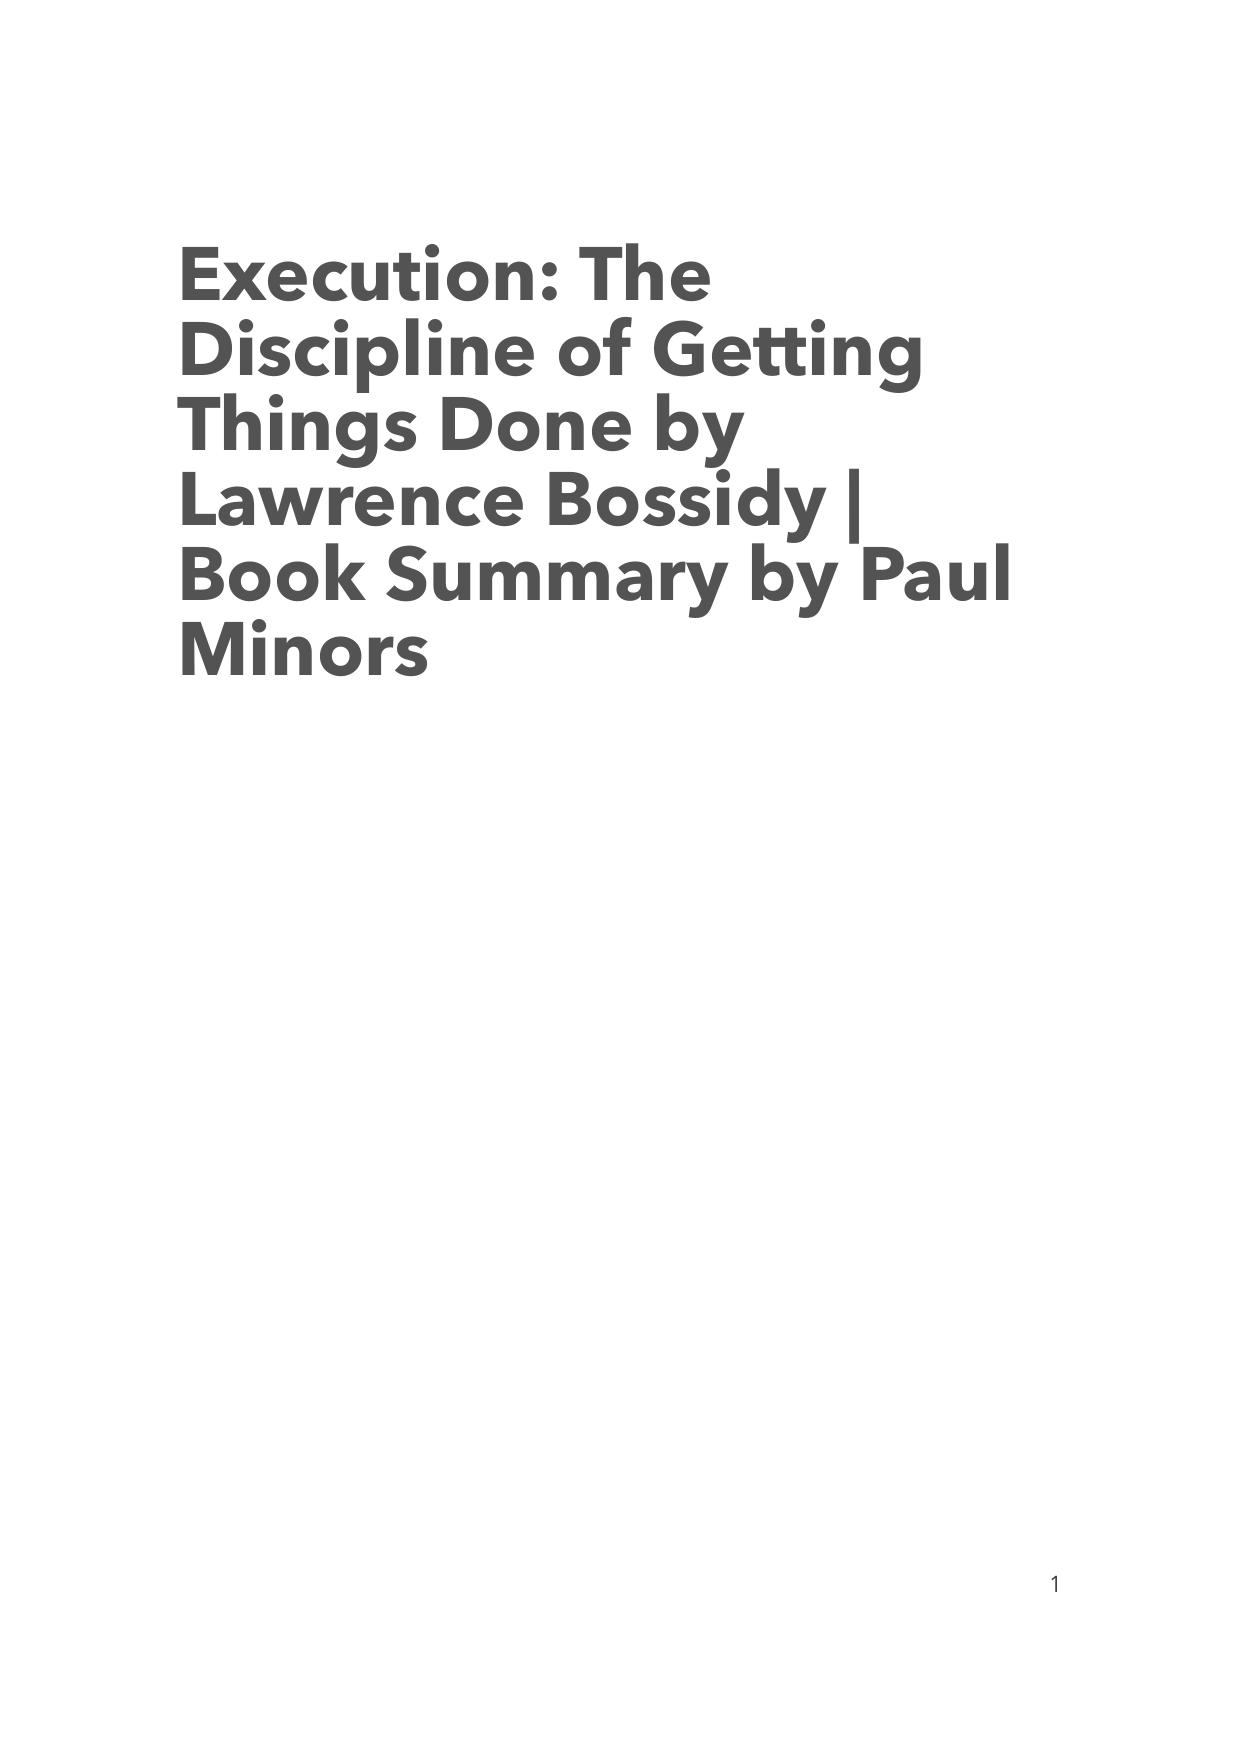 Execution: The Discipline of Getting Things Done (Lawrence Bossidy) Book Summary